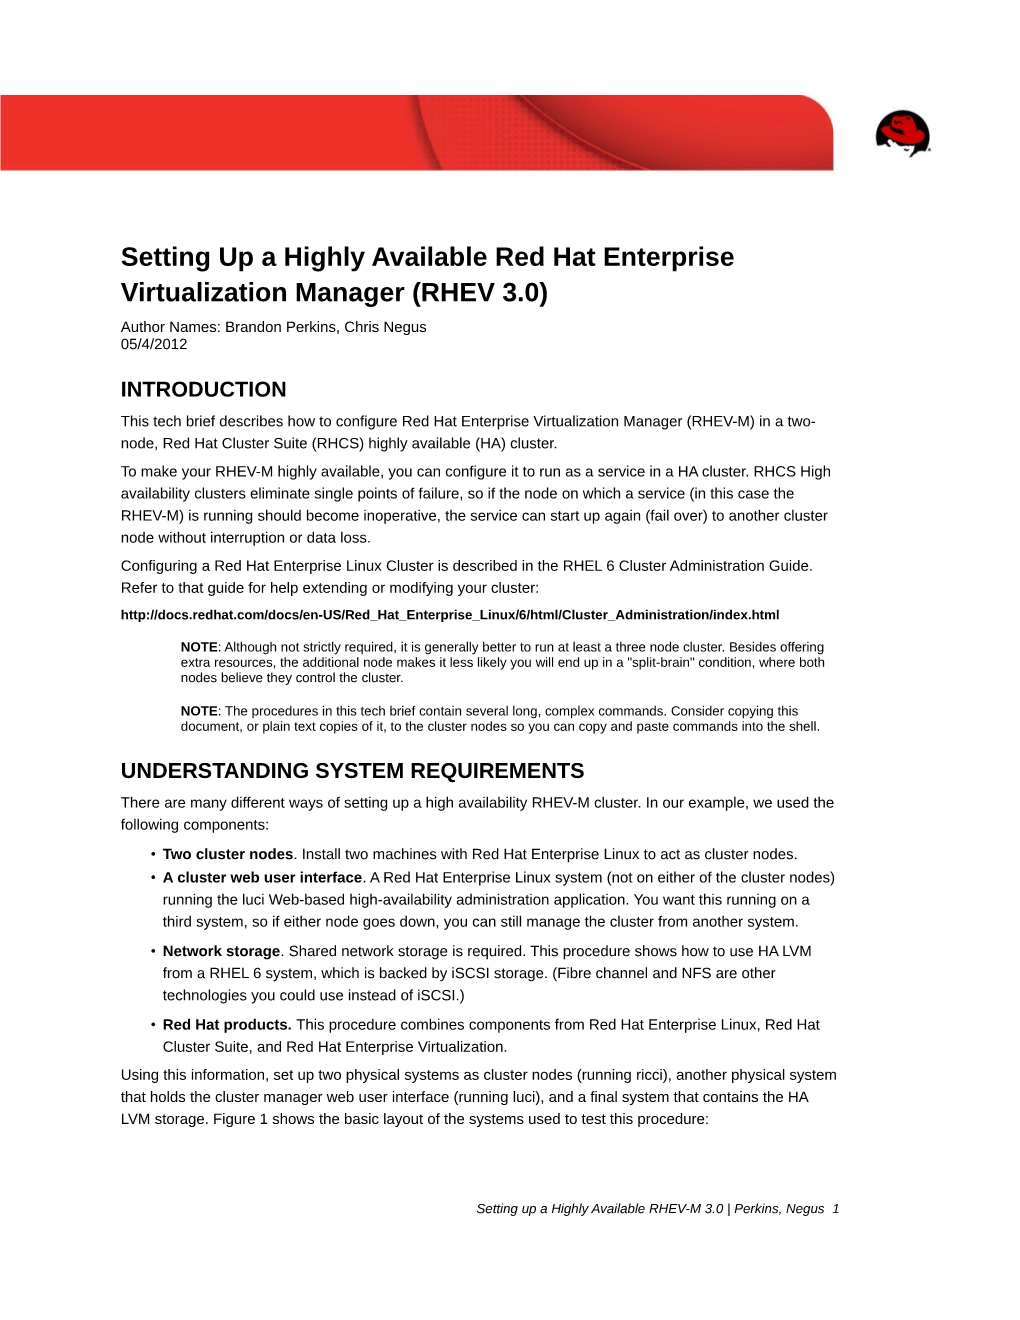 Setting up a Highly Available Red Hat Enterprise Virtualization Manager (RHEV 3.0) Author Names: Brandon Perkins, Chris Negus 05/4/2012